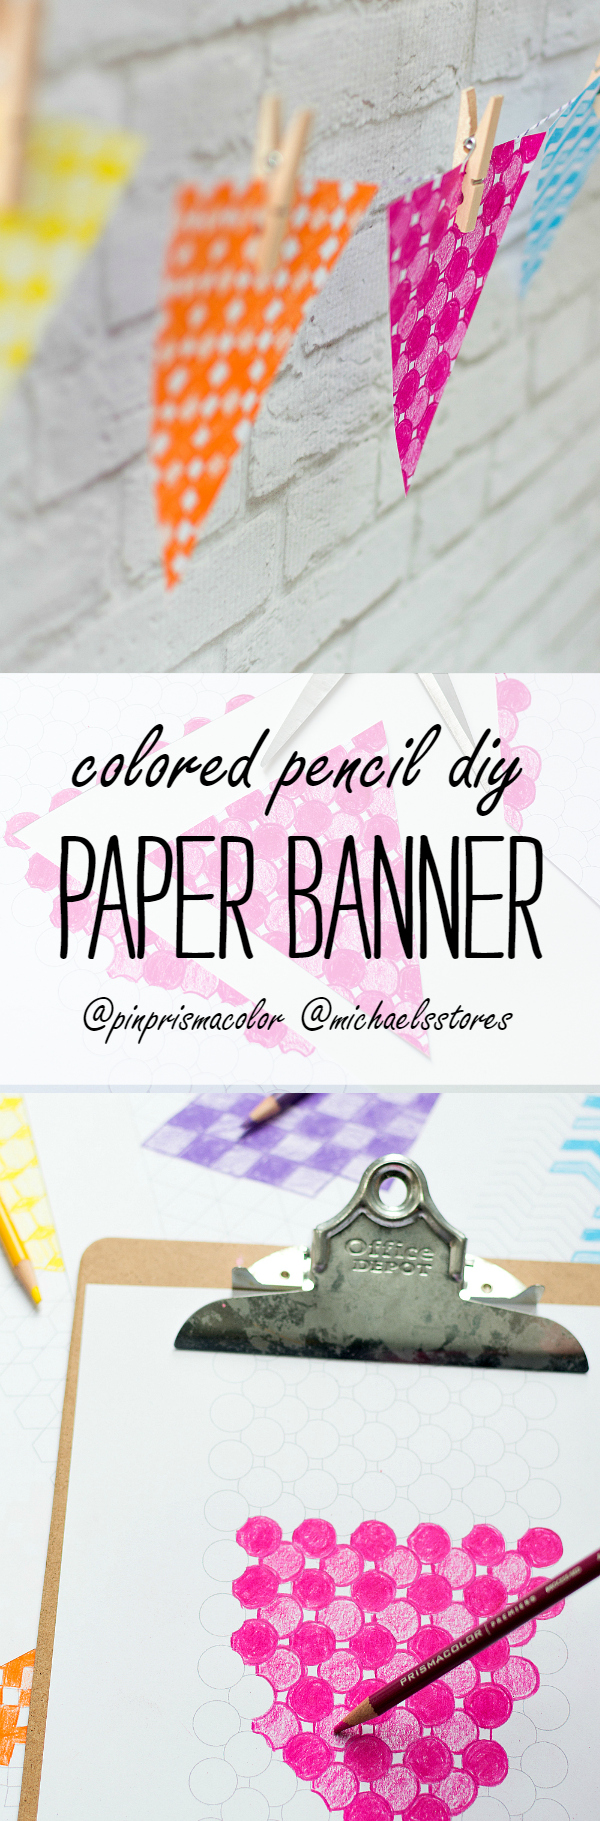 Paper Banner DIY: How To Make